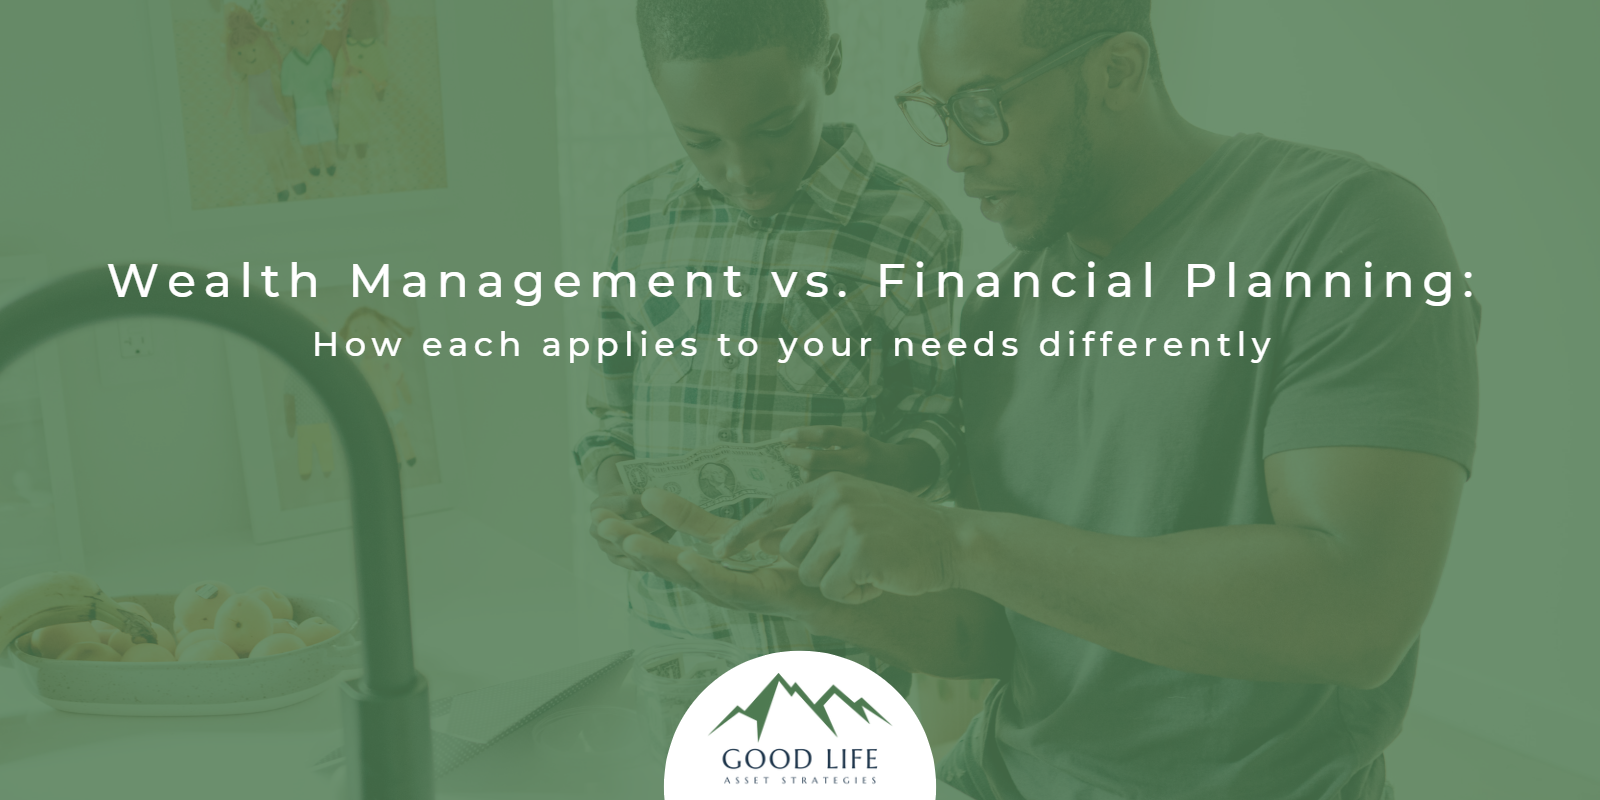 Wealth management vs. financial planning: understanding how each applies to your needs differently